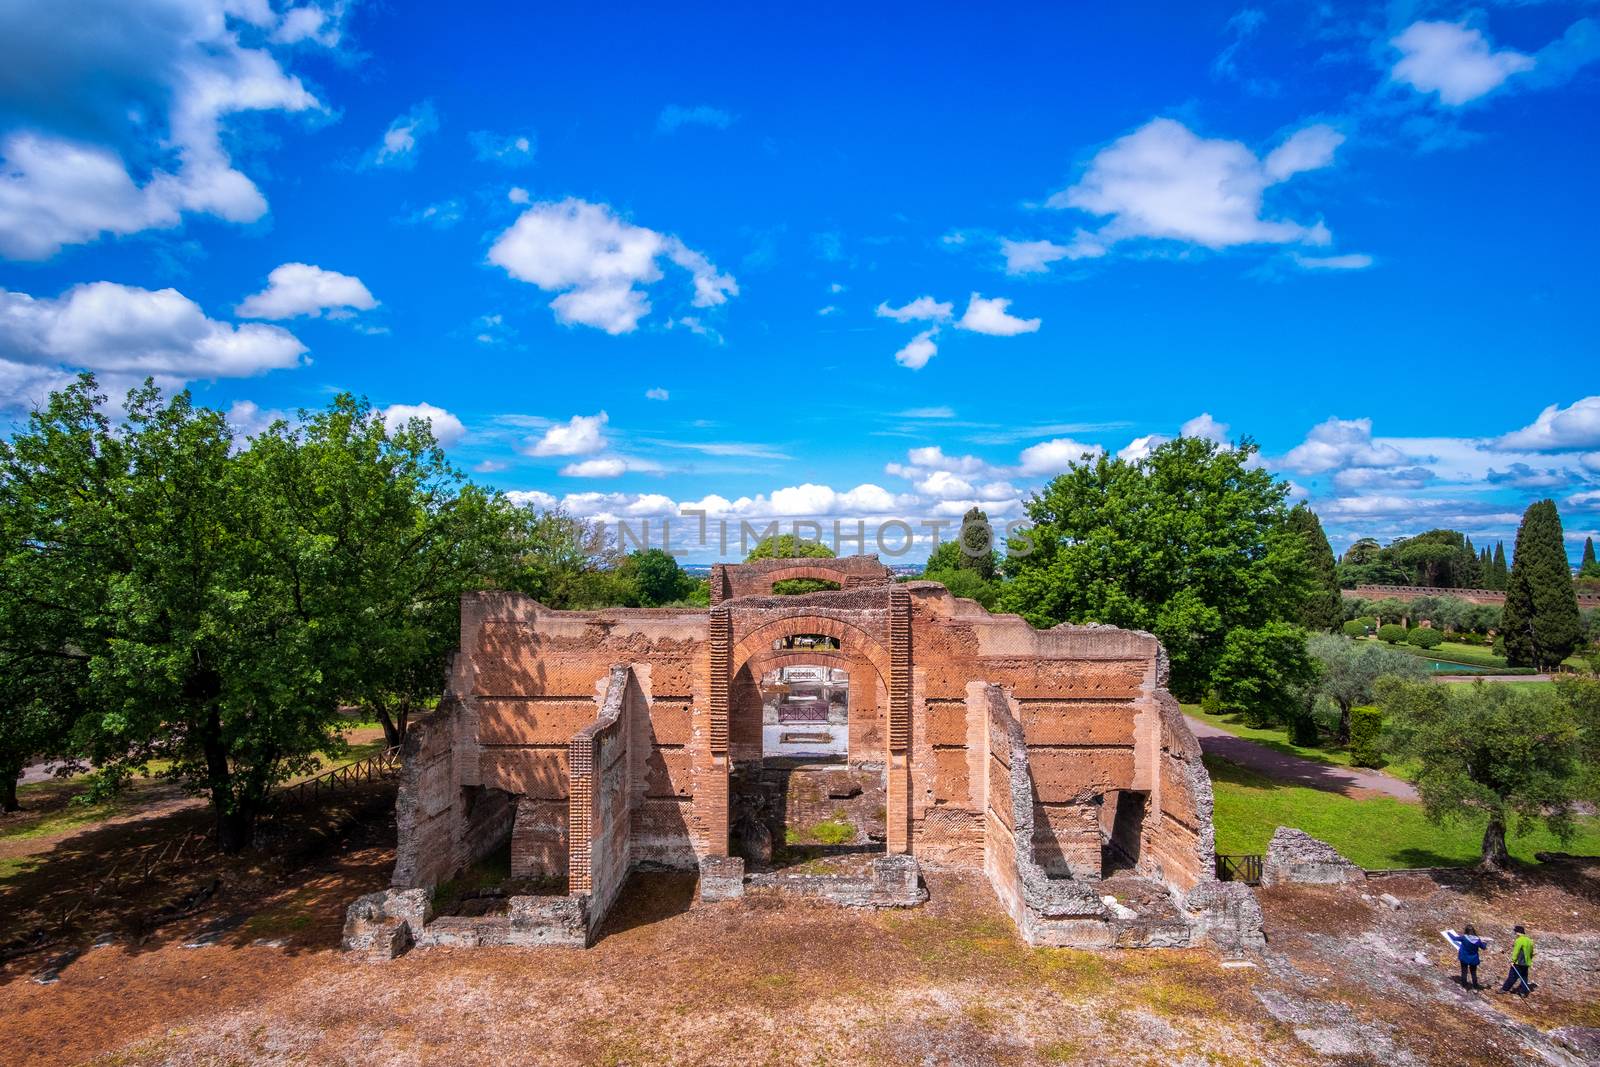 Tivoli - Villa Adriana cultural Rome tour- archaeological landmark in Italy aerial view of the Three Exedras building by LucaLorenzelli